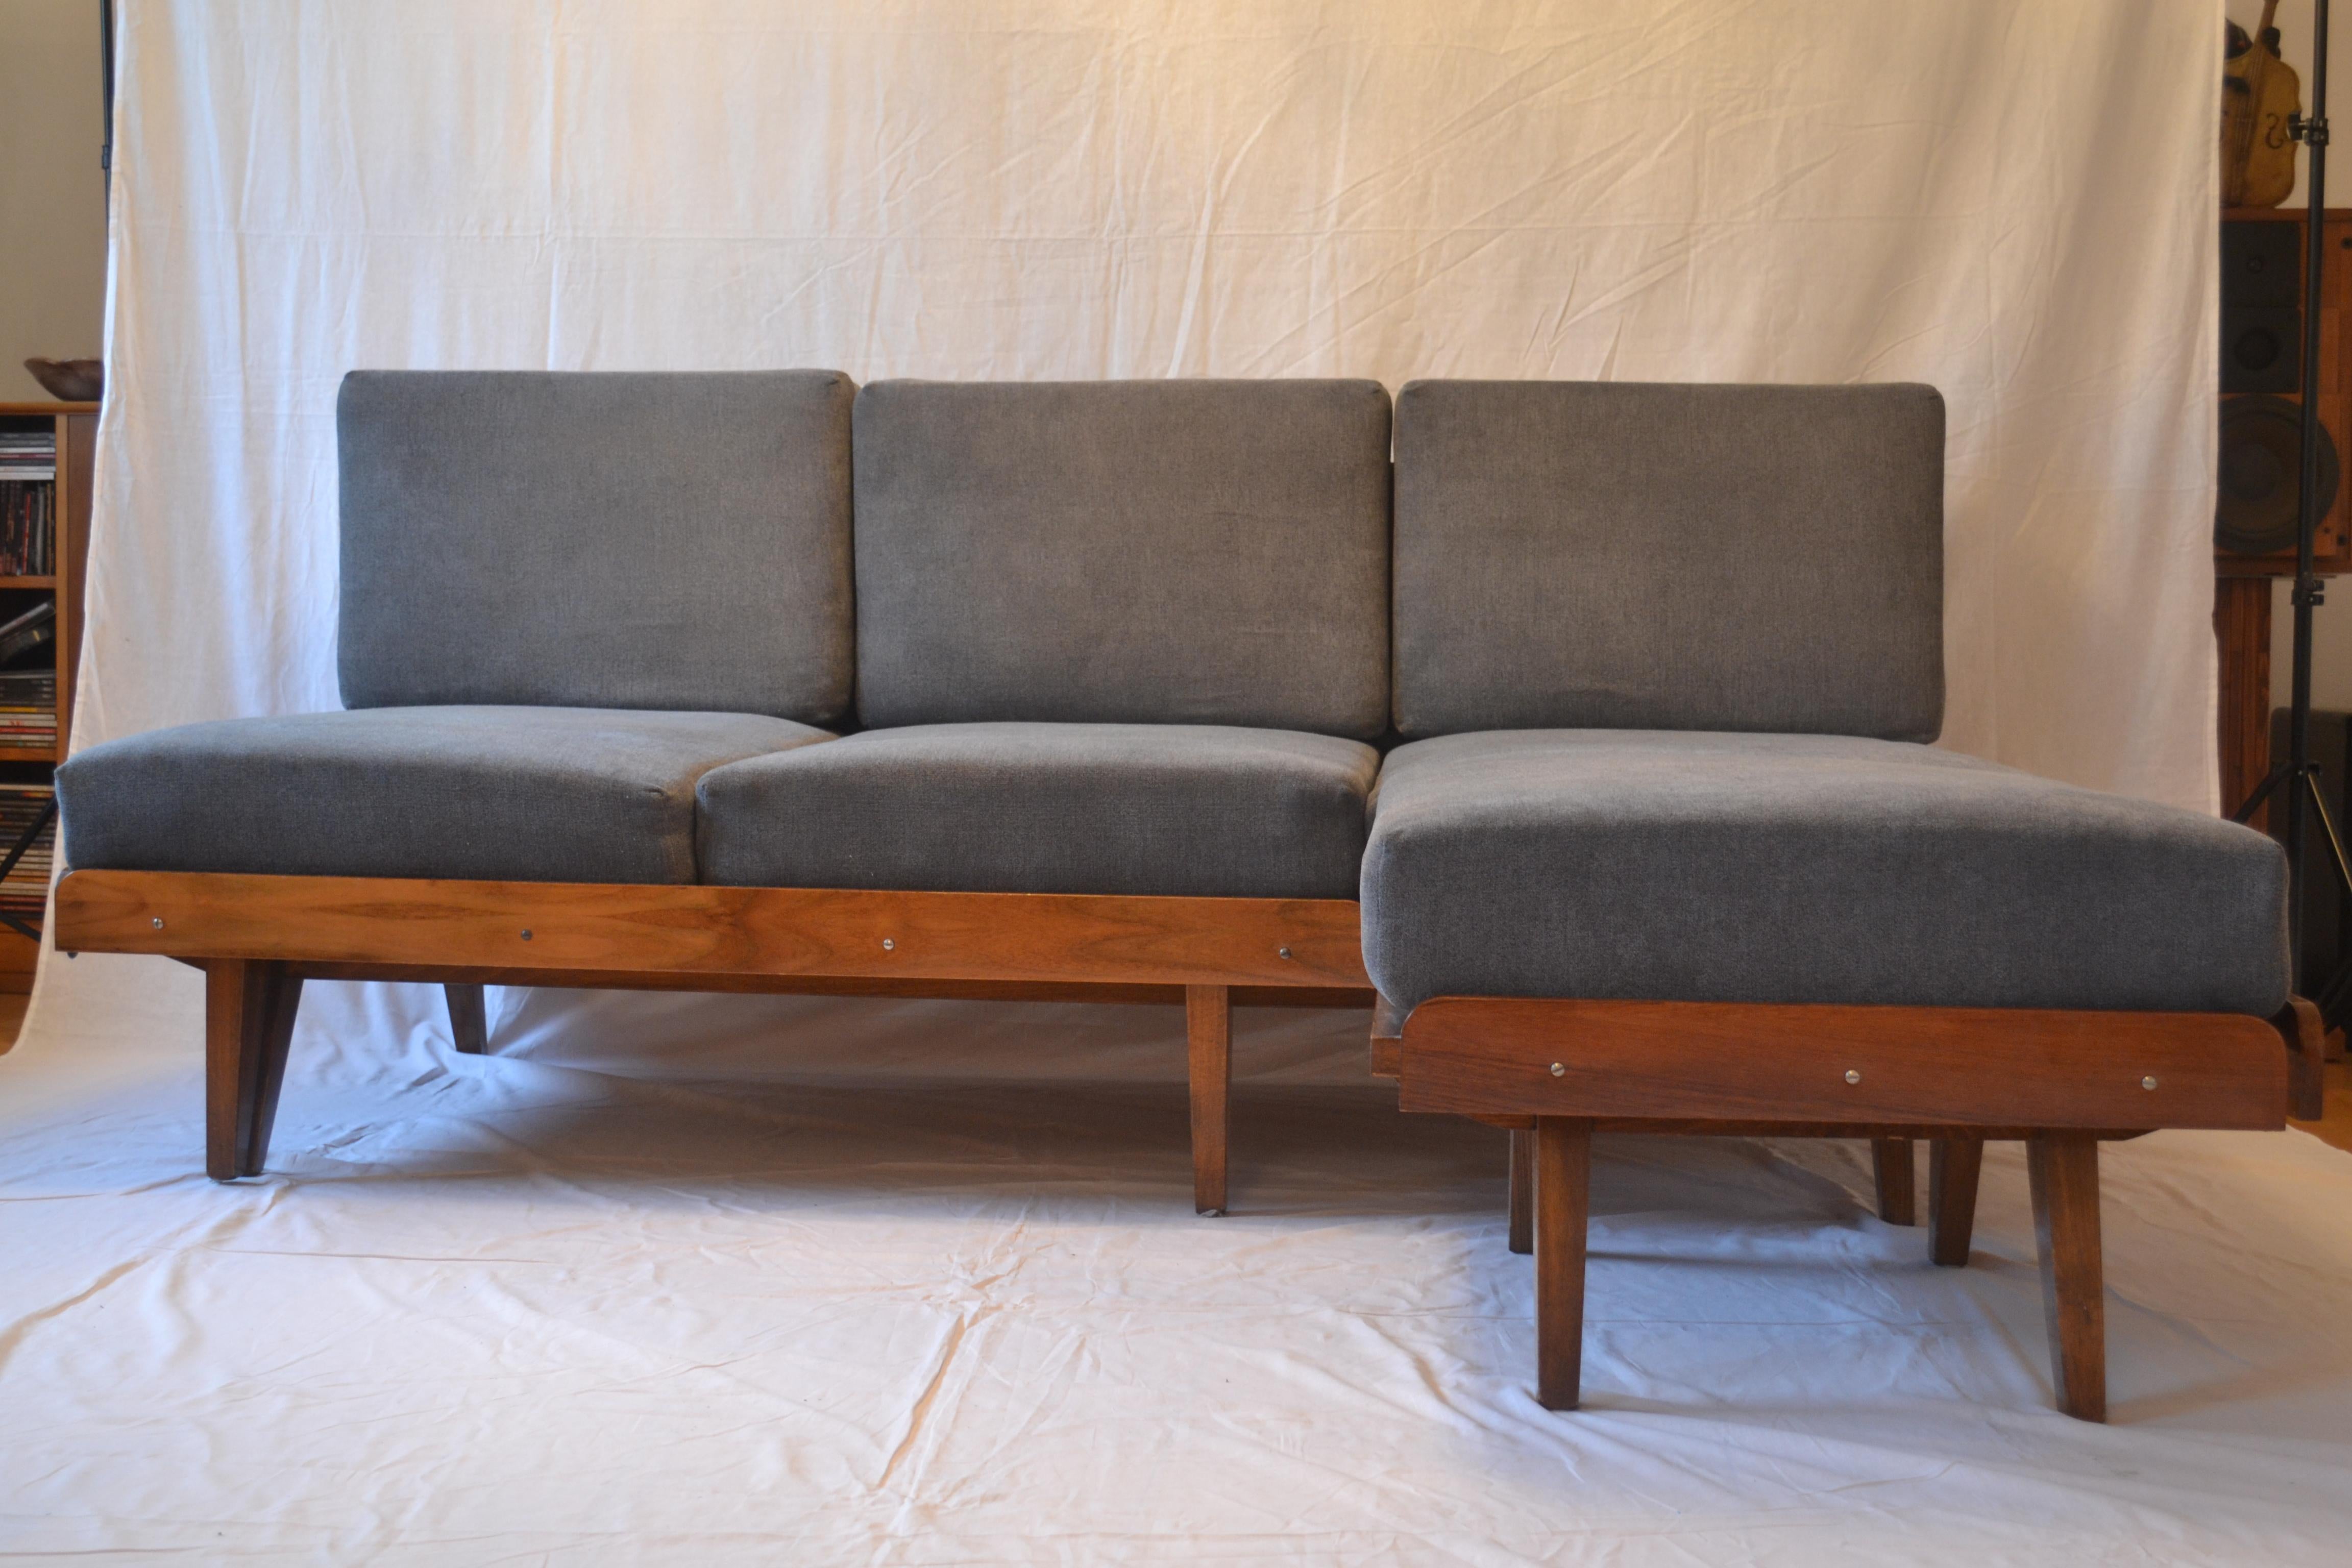 Czechoslovak sofa Tatra Nabytok from 1965. Original with new upholstery. The sofa has a sleeping function and when measured, measures 155 cm. The wide footrest definitely improves the comfort of using the sofa. Classic, cool form and excellent